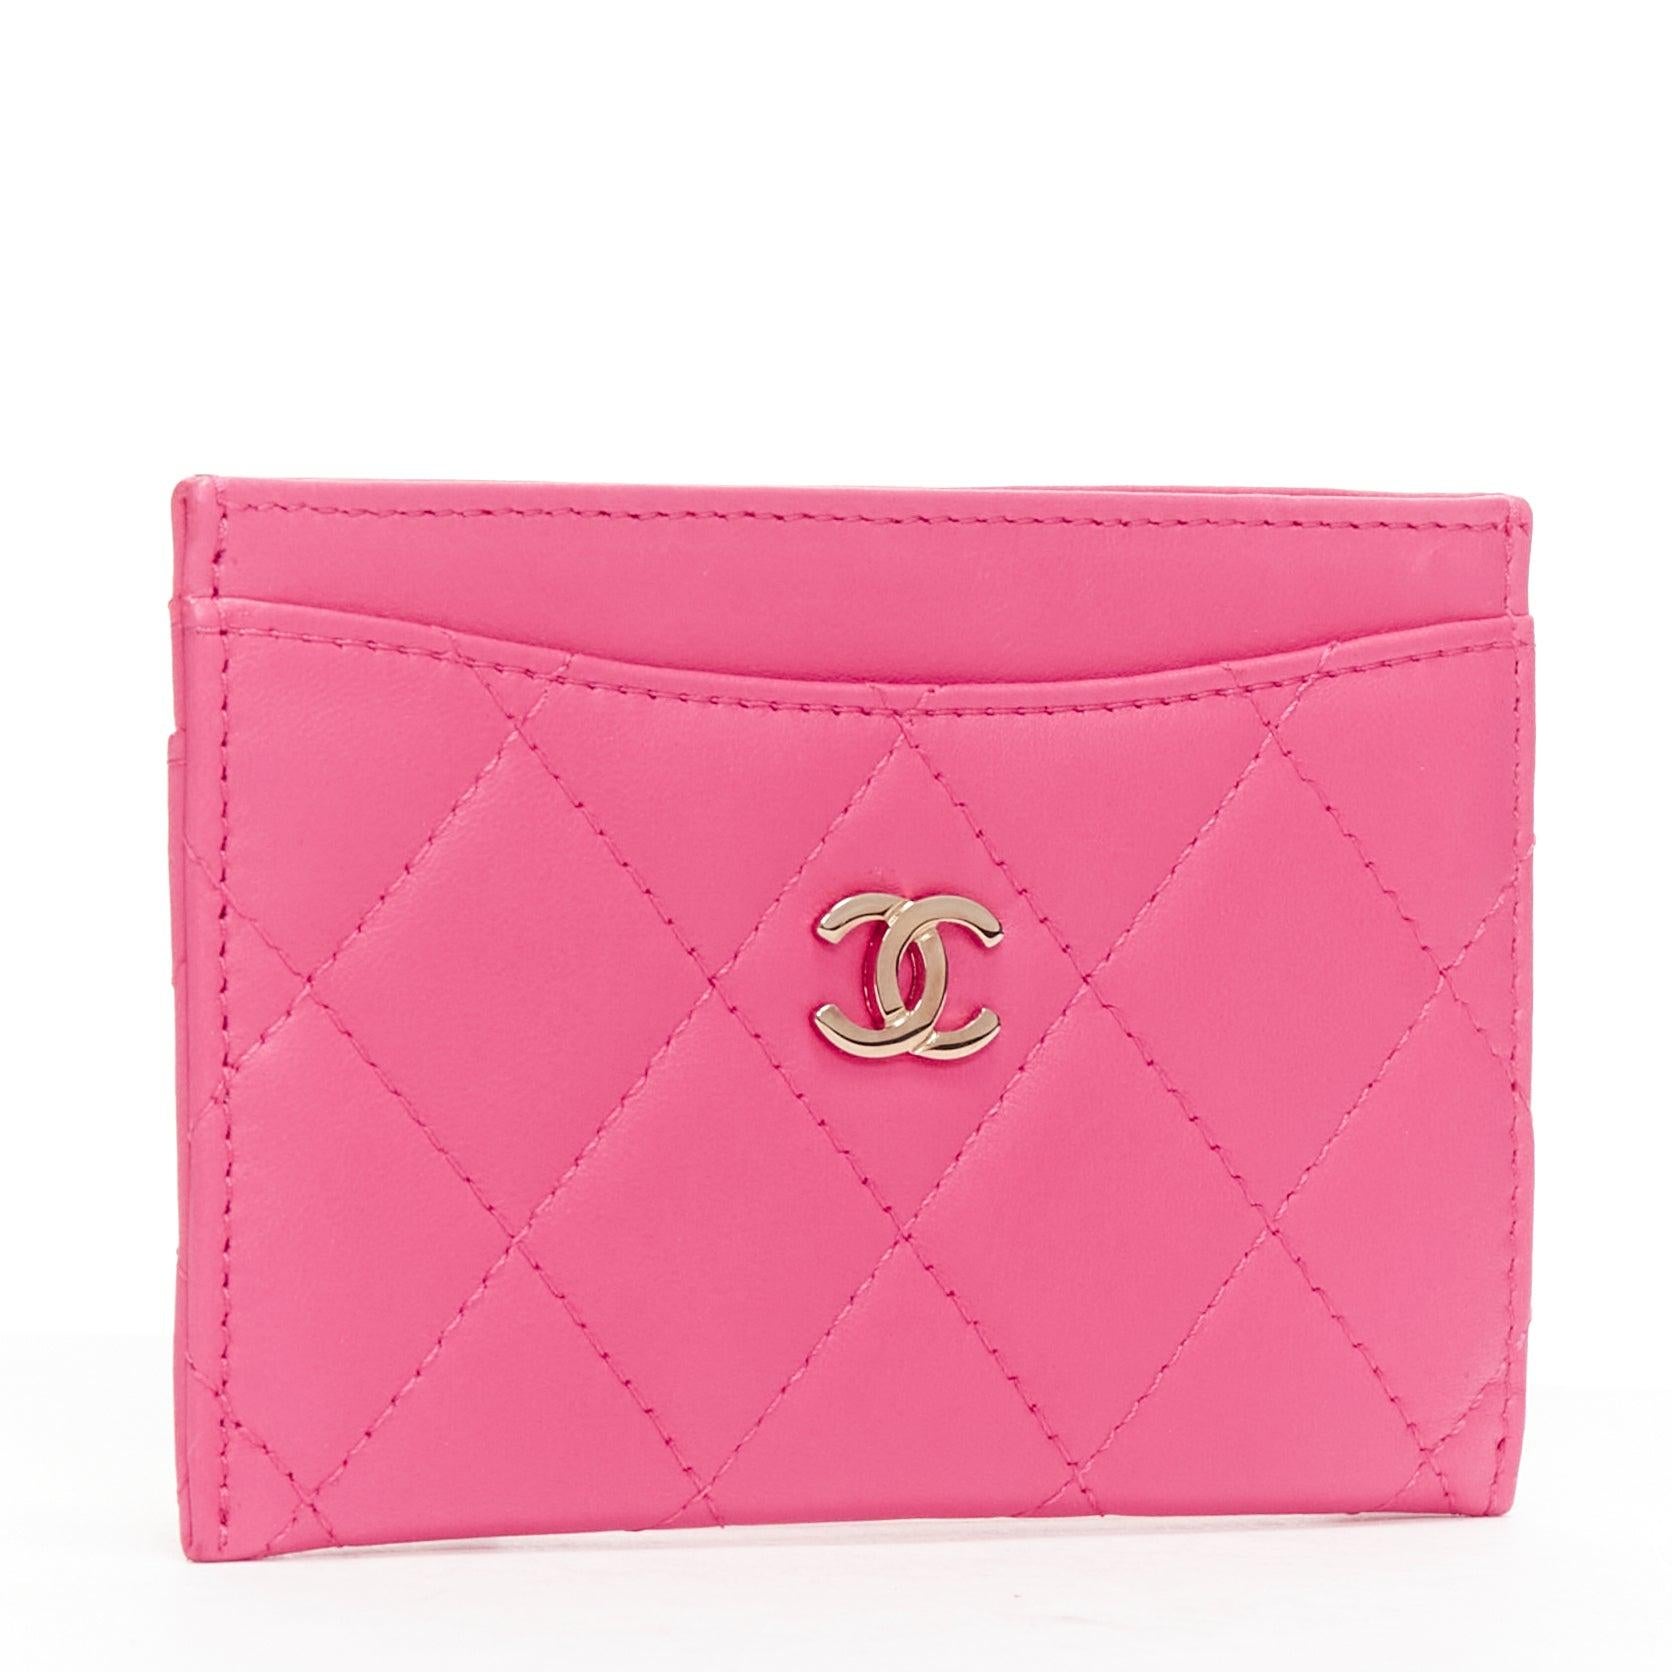 CHANEL bright pink smooth leather CC logo quilted cardholder In Excellent Condition For Sale In Hong Kong, NT